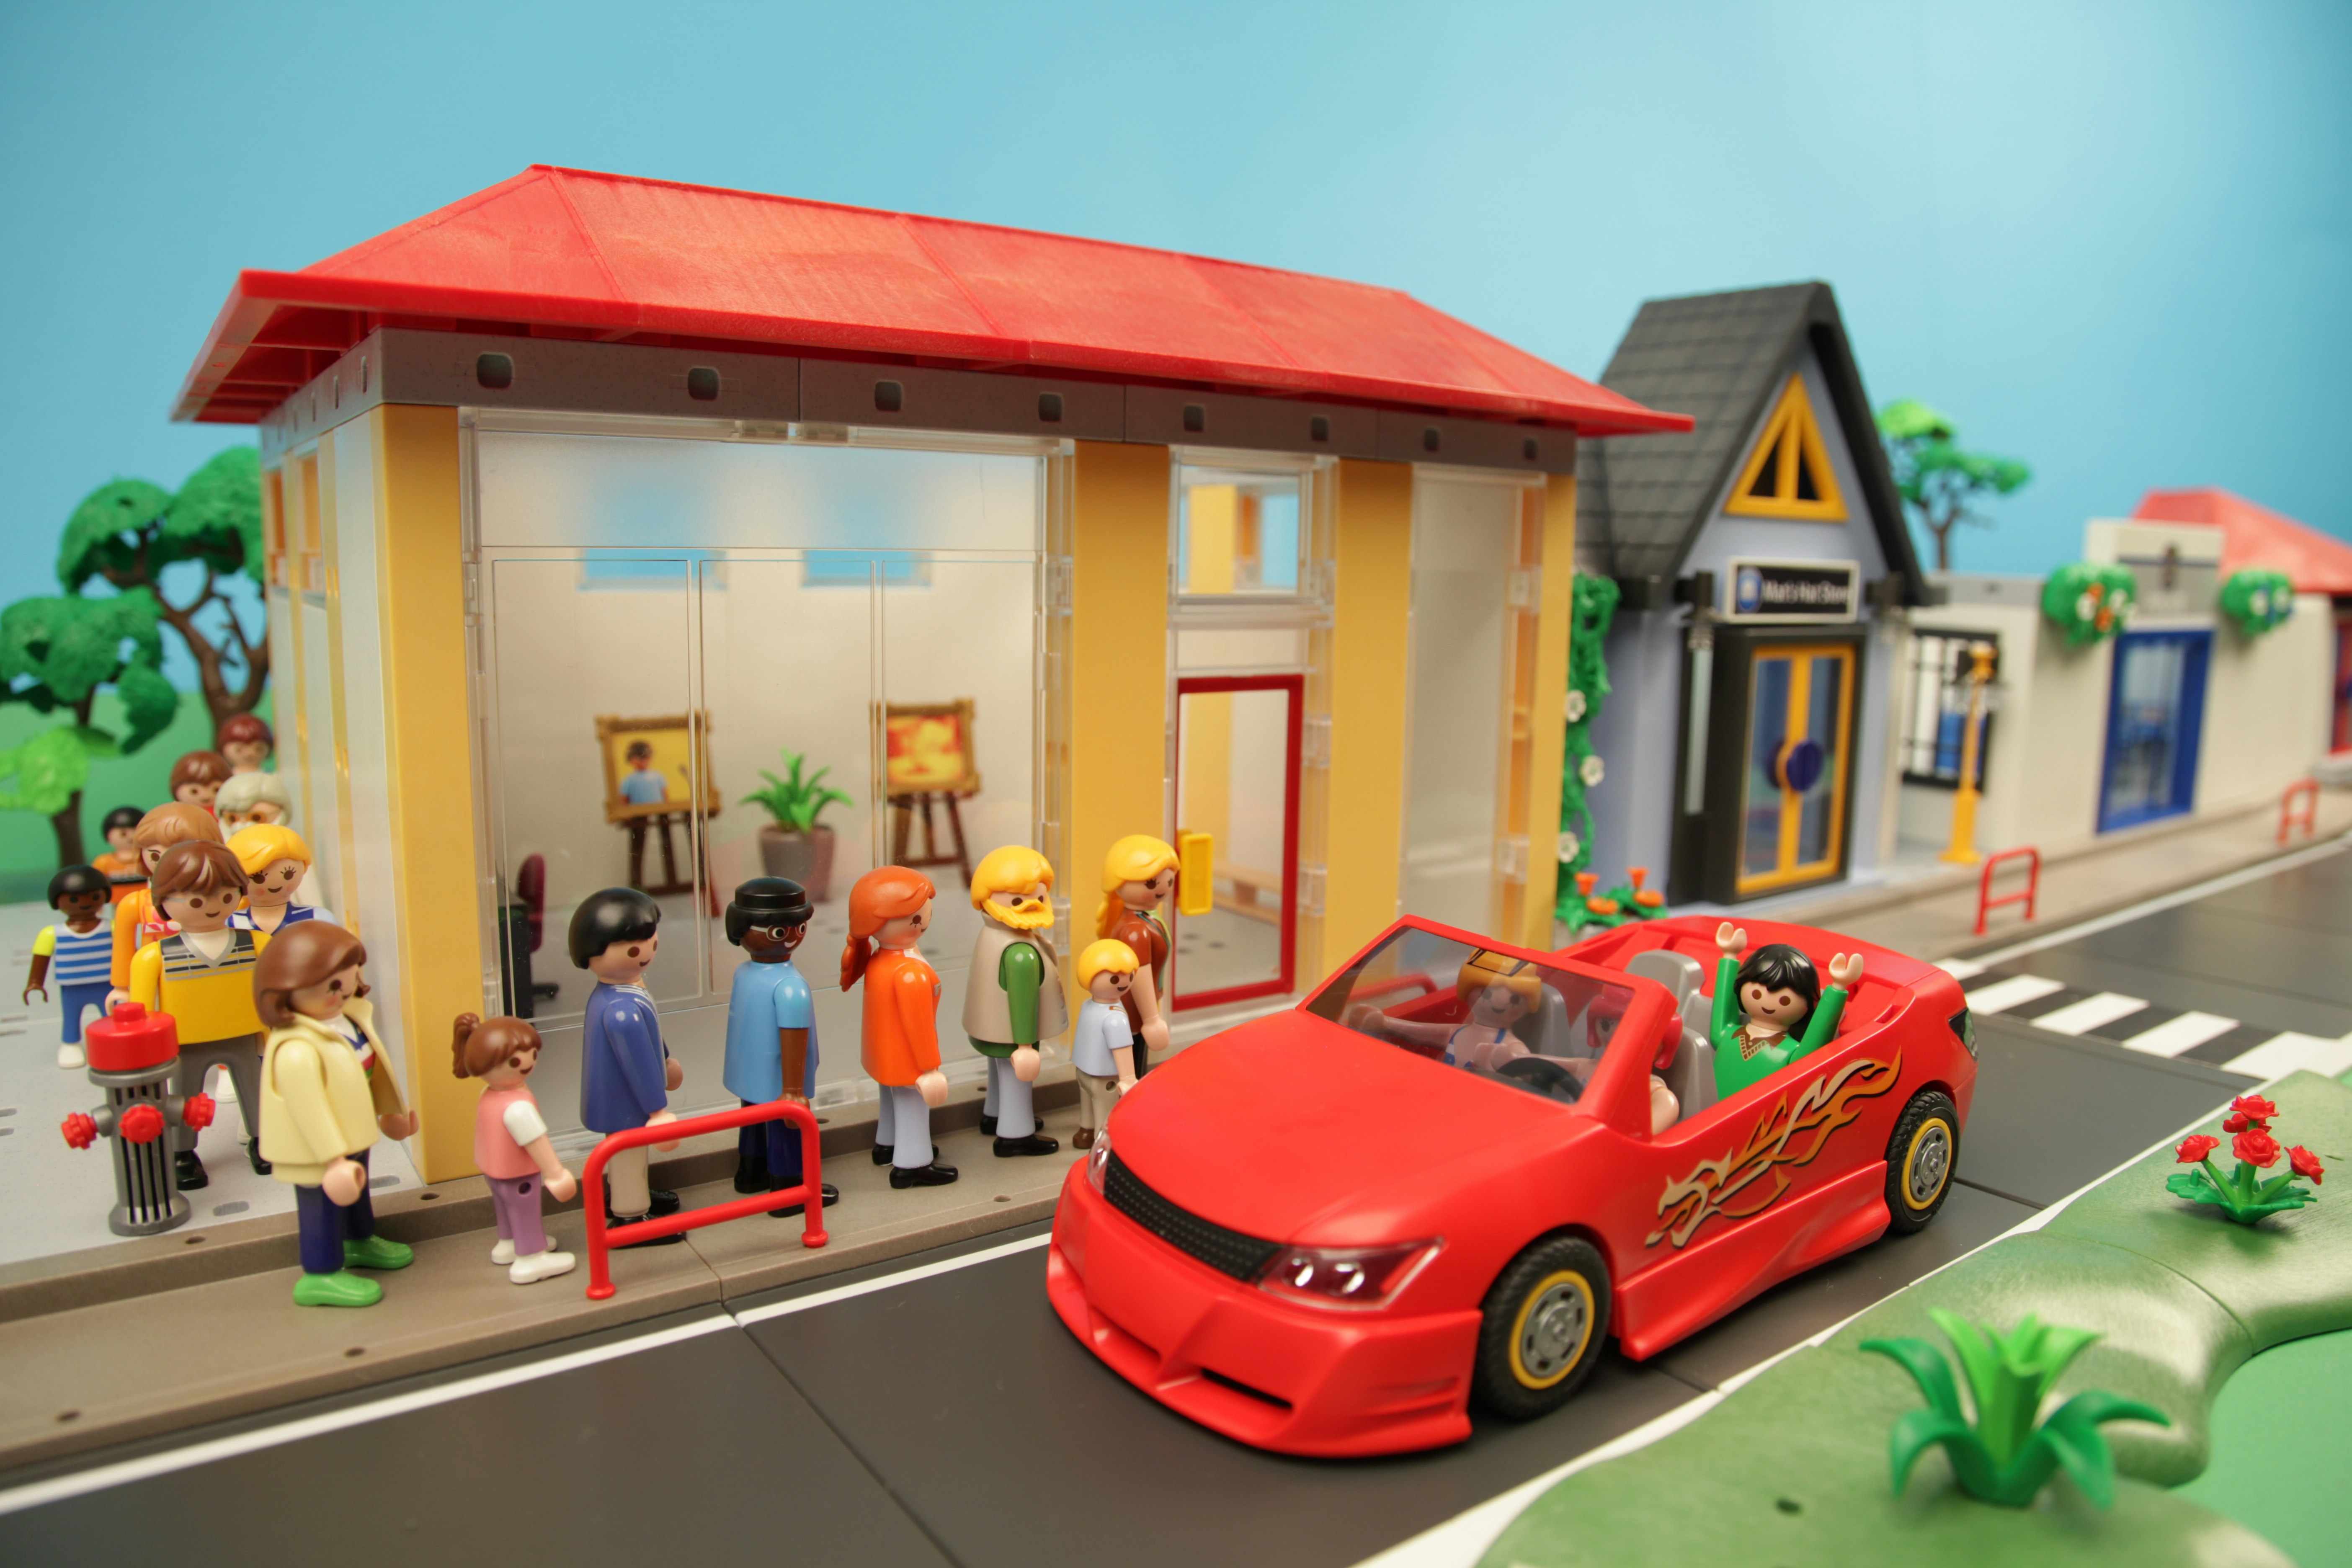 Playmobil people queuing for a gallery while a fancy red sports car whizzes past.